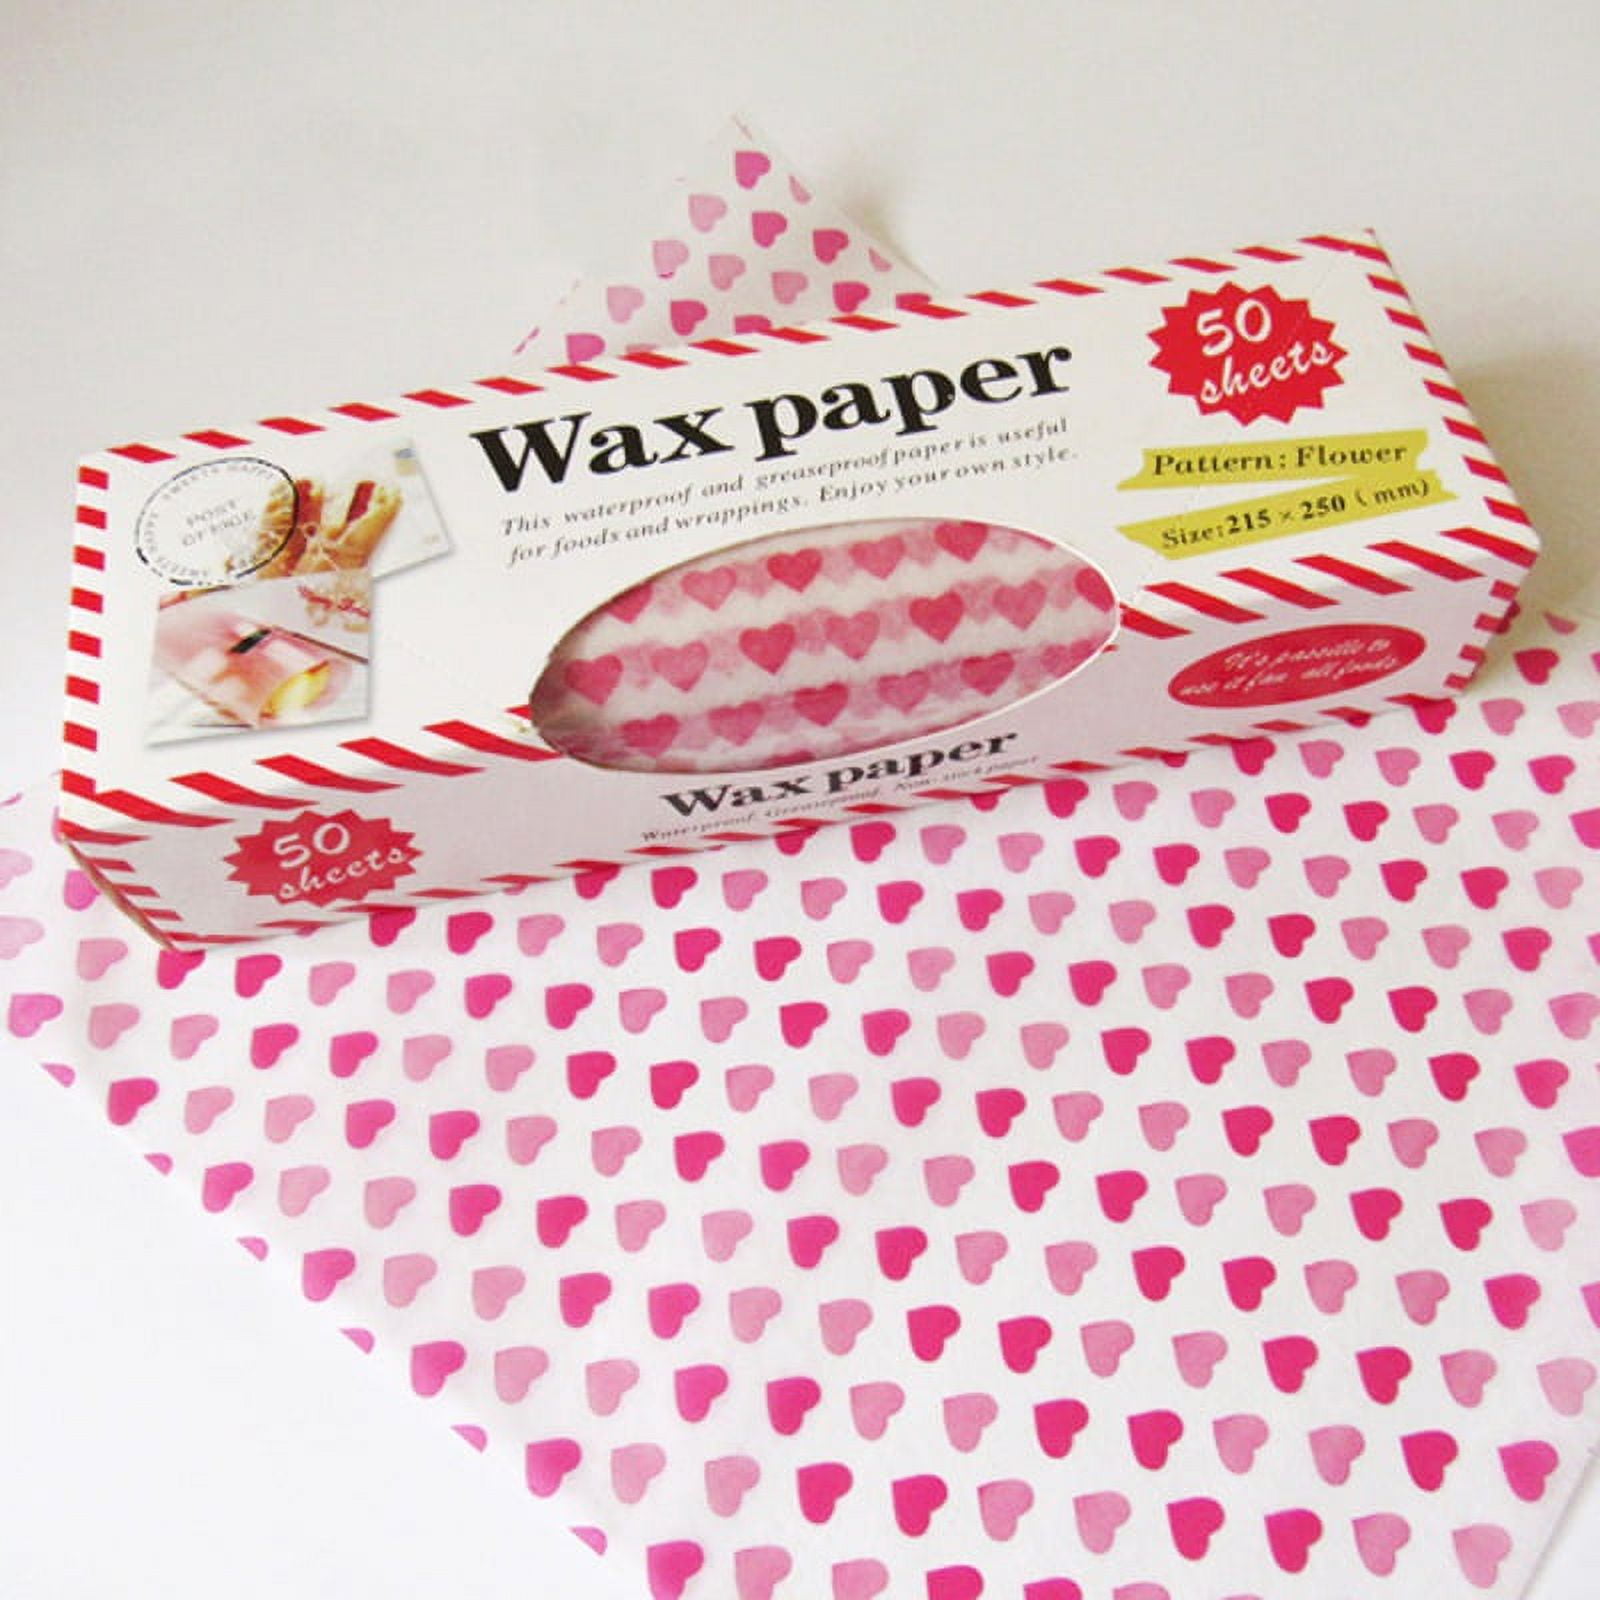 10pcs/set D Style Printed Wax Paper Food-grade Greaseproof Non